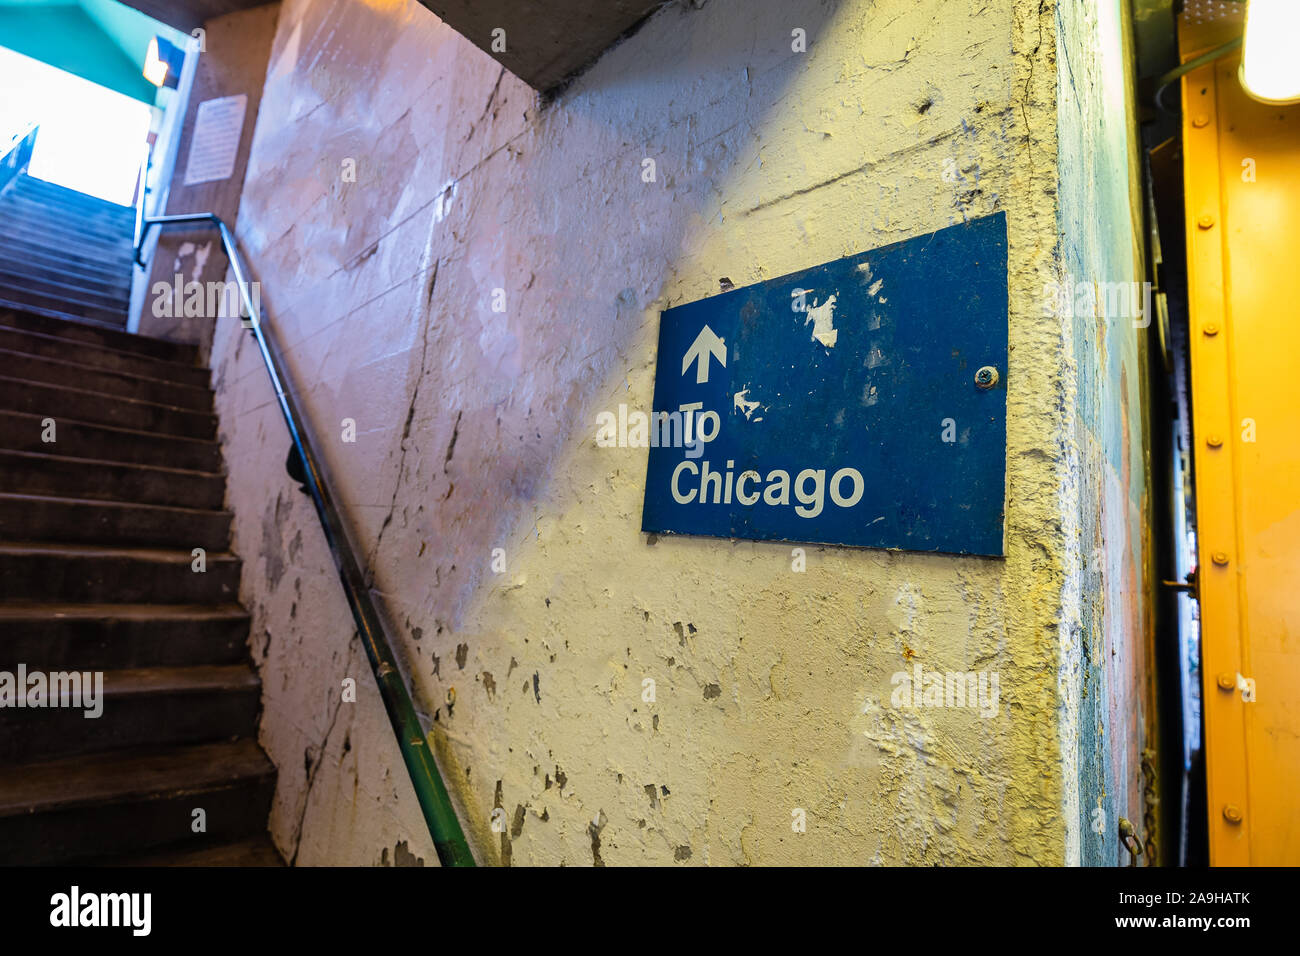 A sign pointing up a set of stairs towards Chicago. Stock Photo